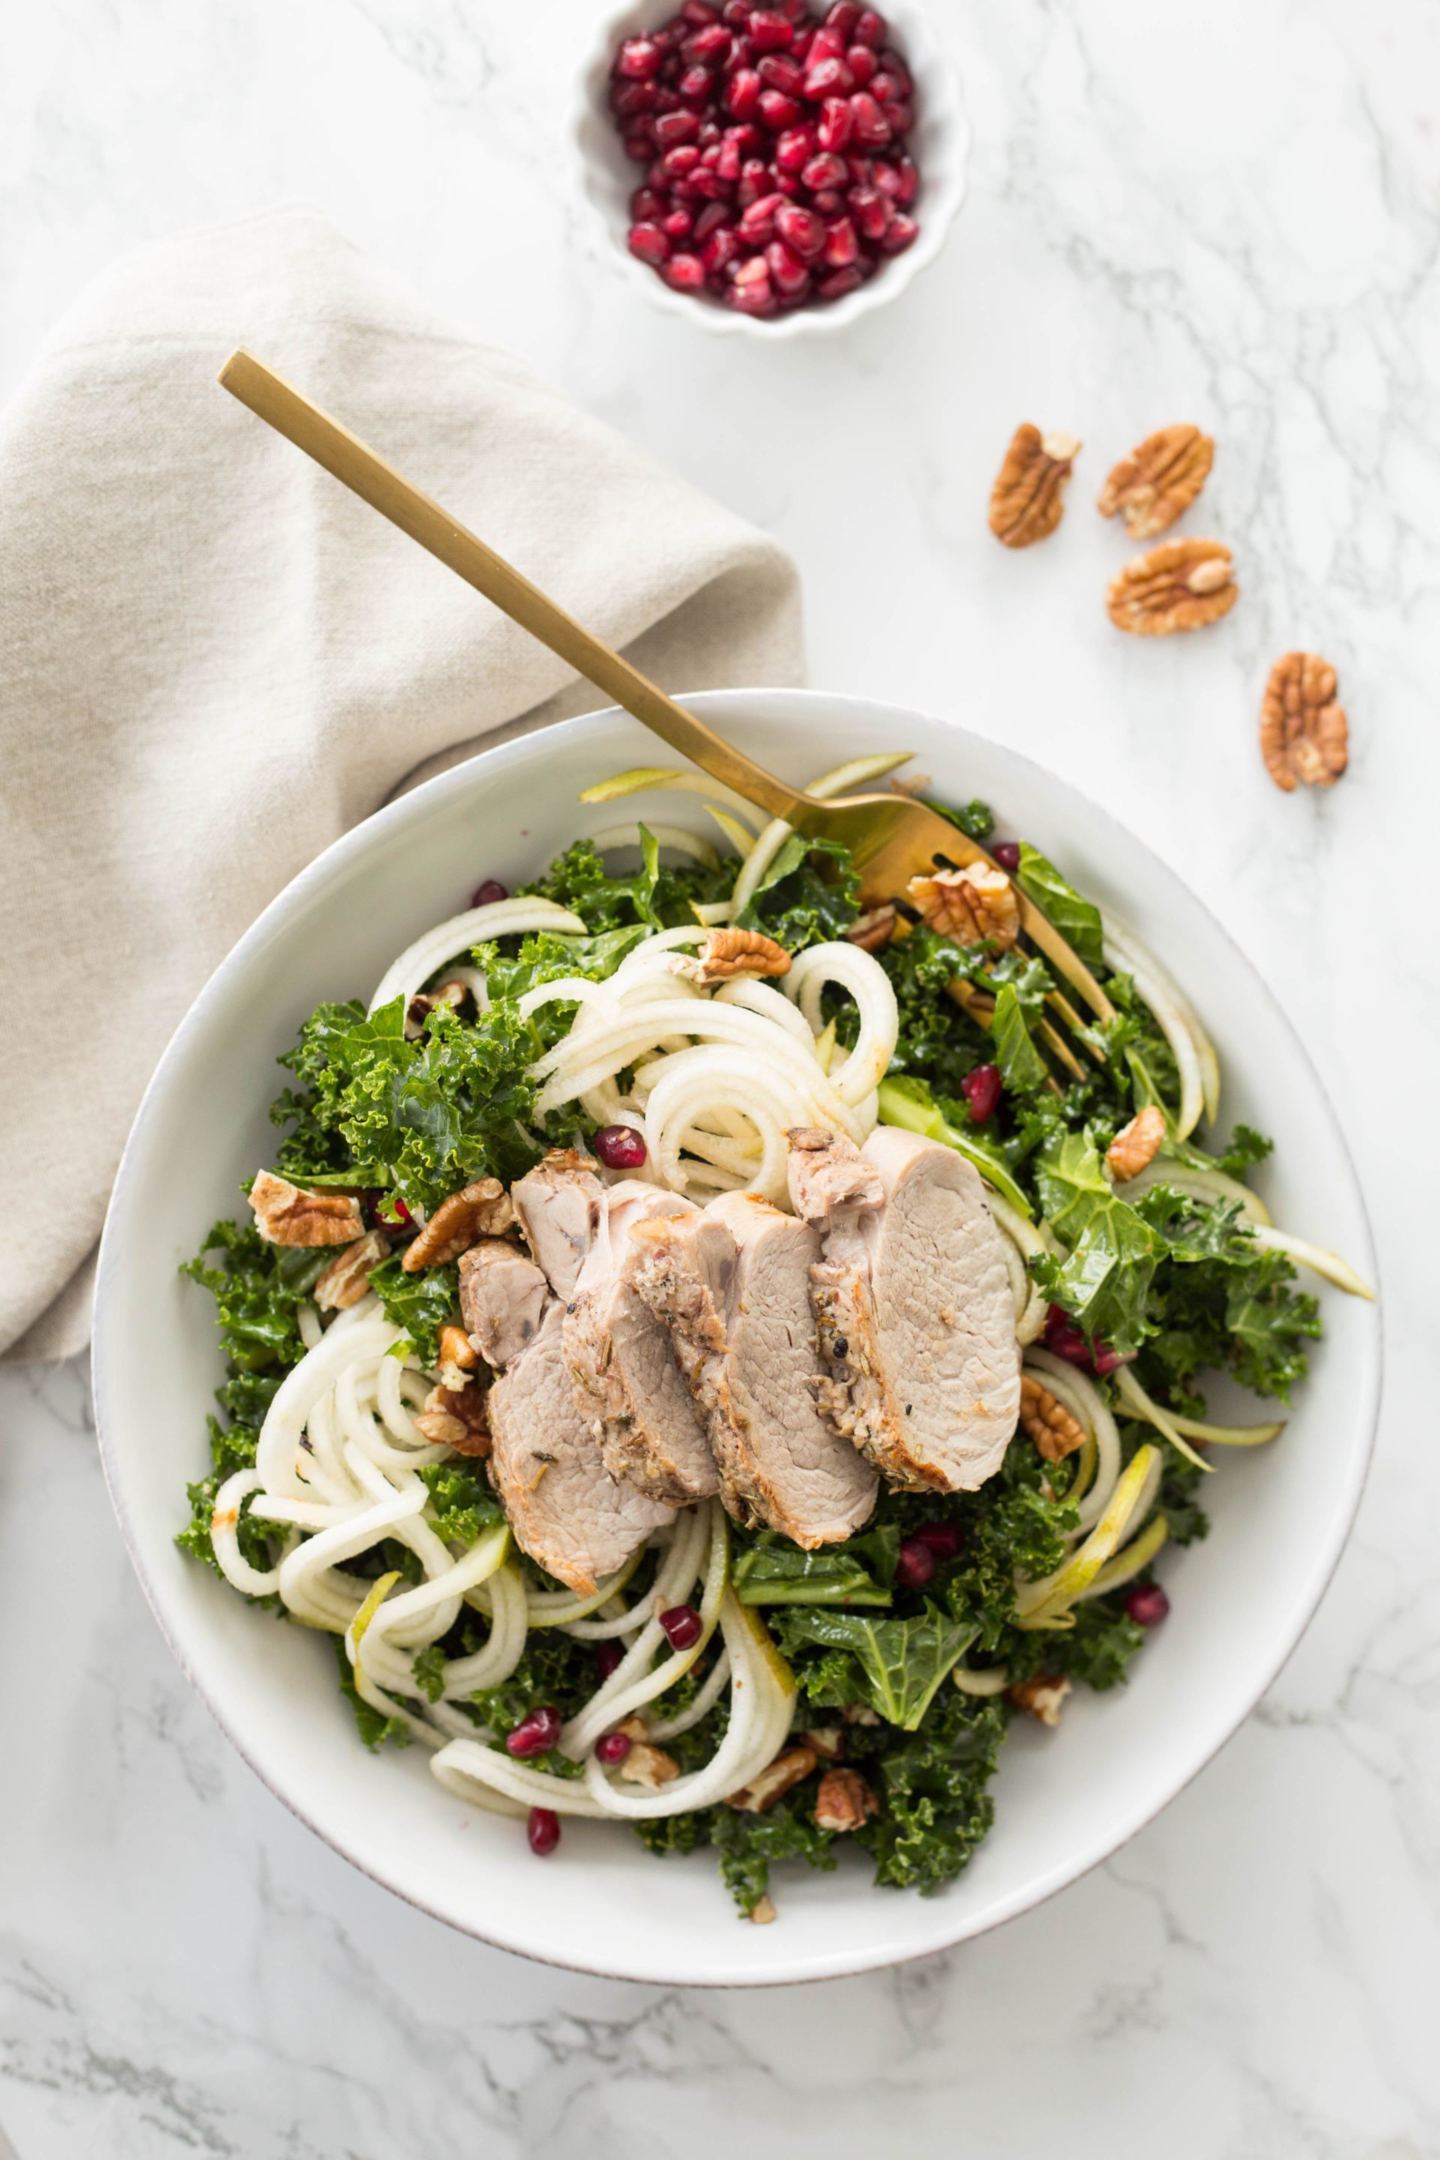 Pear Noodle, Pomegranate and Kale Salad with Roasted Pork Tenderloin: